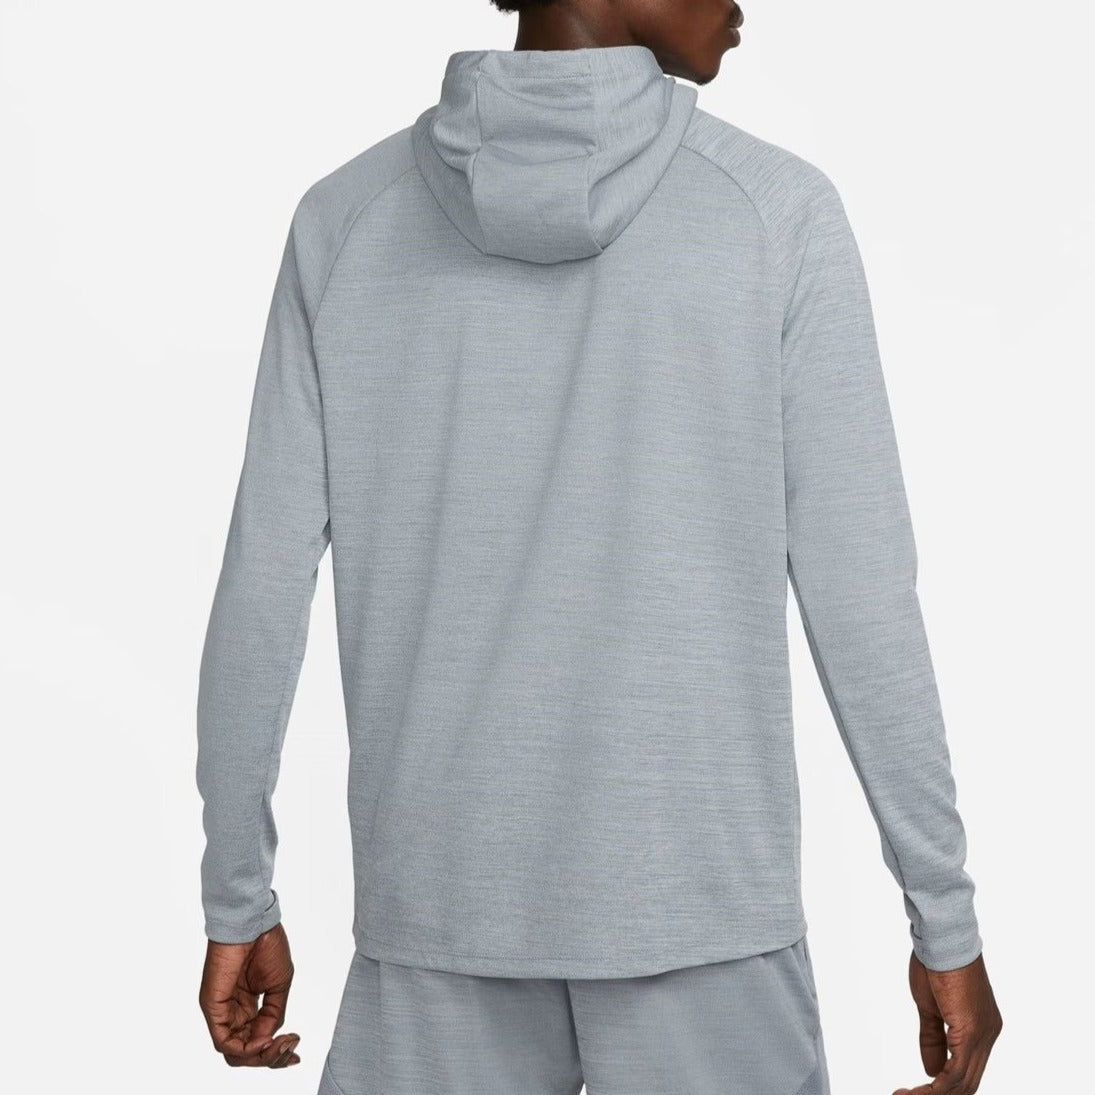 NIKE ACADEMY PRO PULLOVER HOODIE - COOL GREY